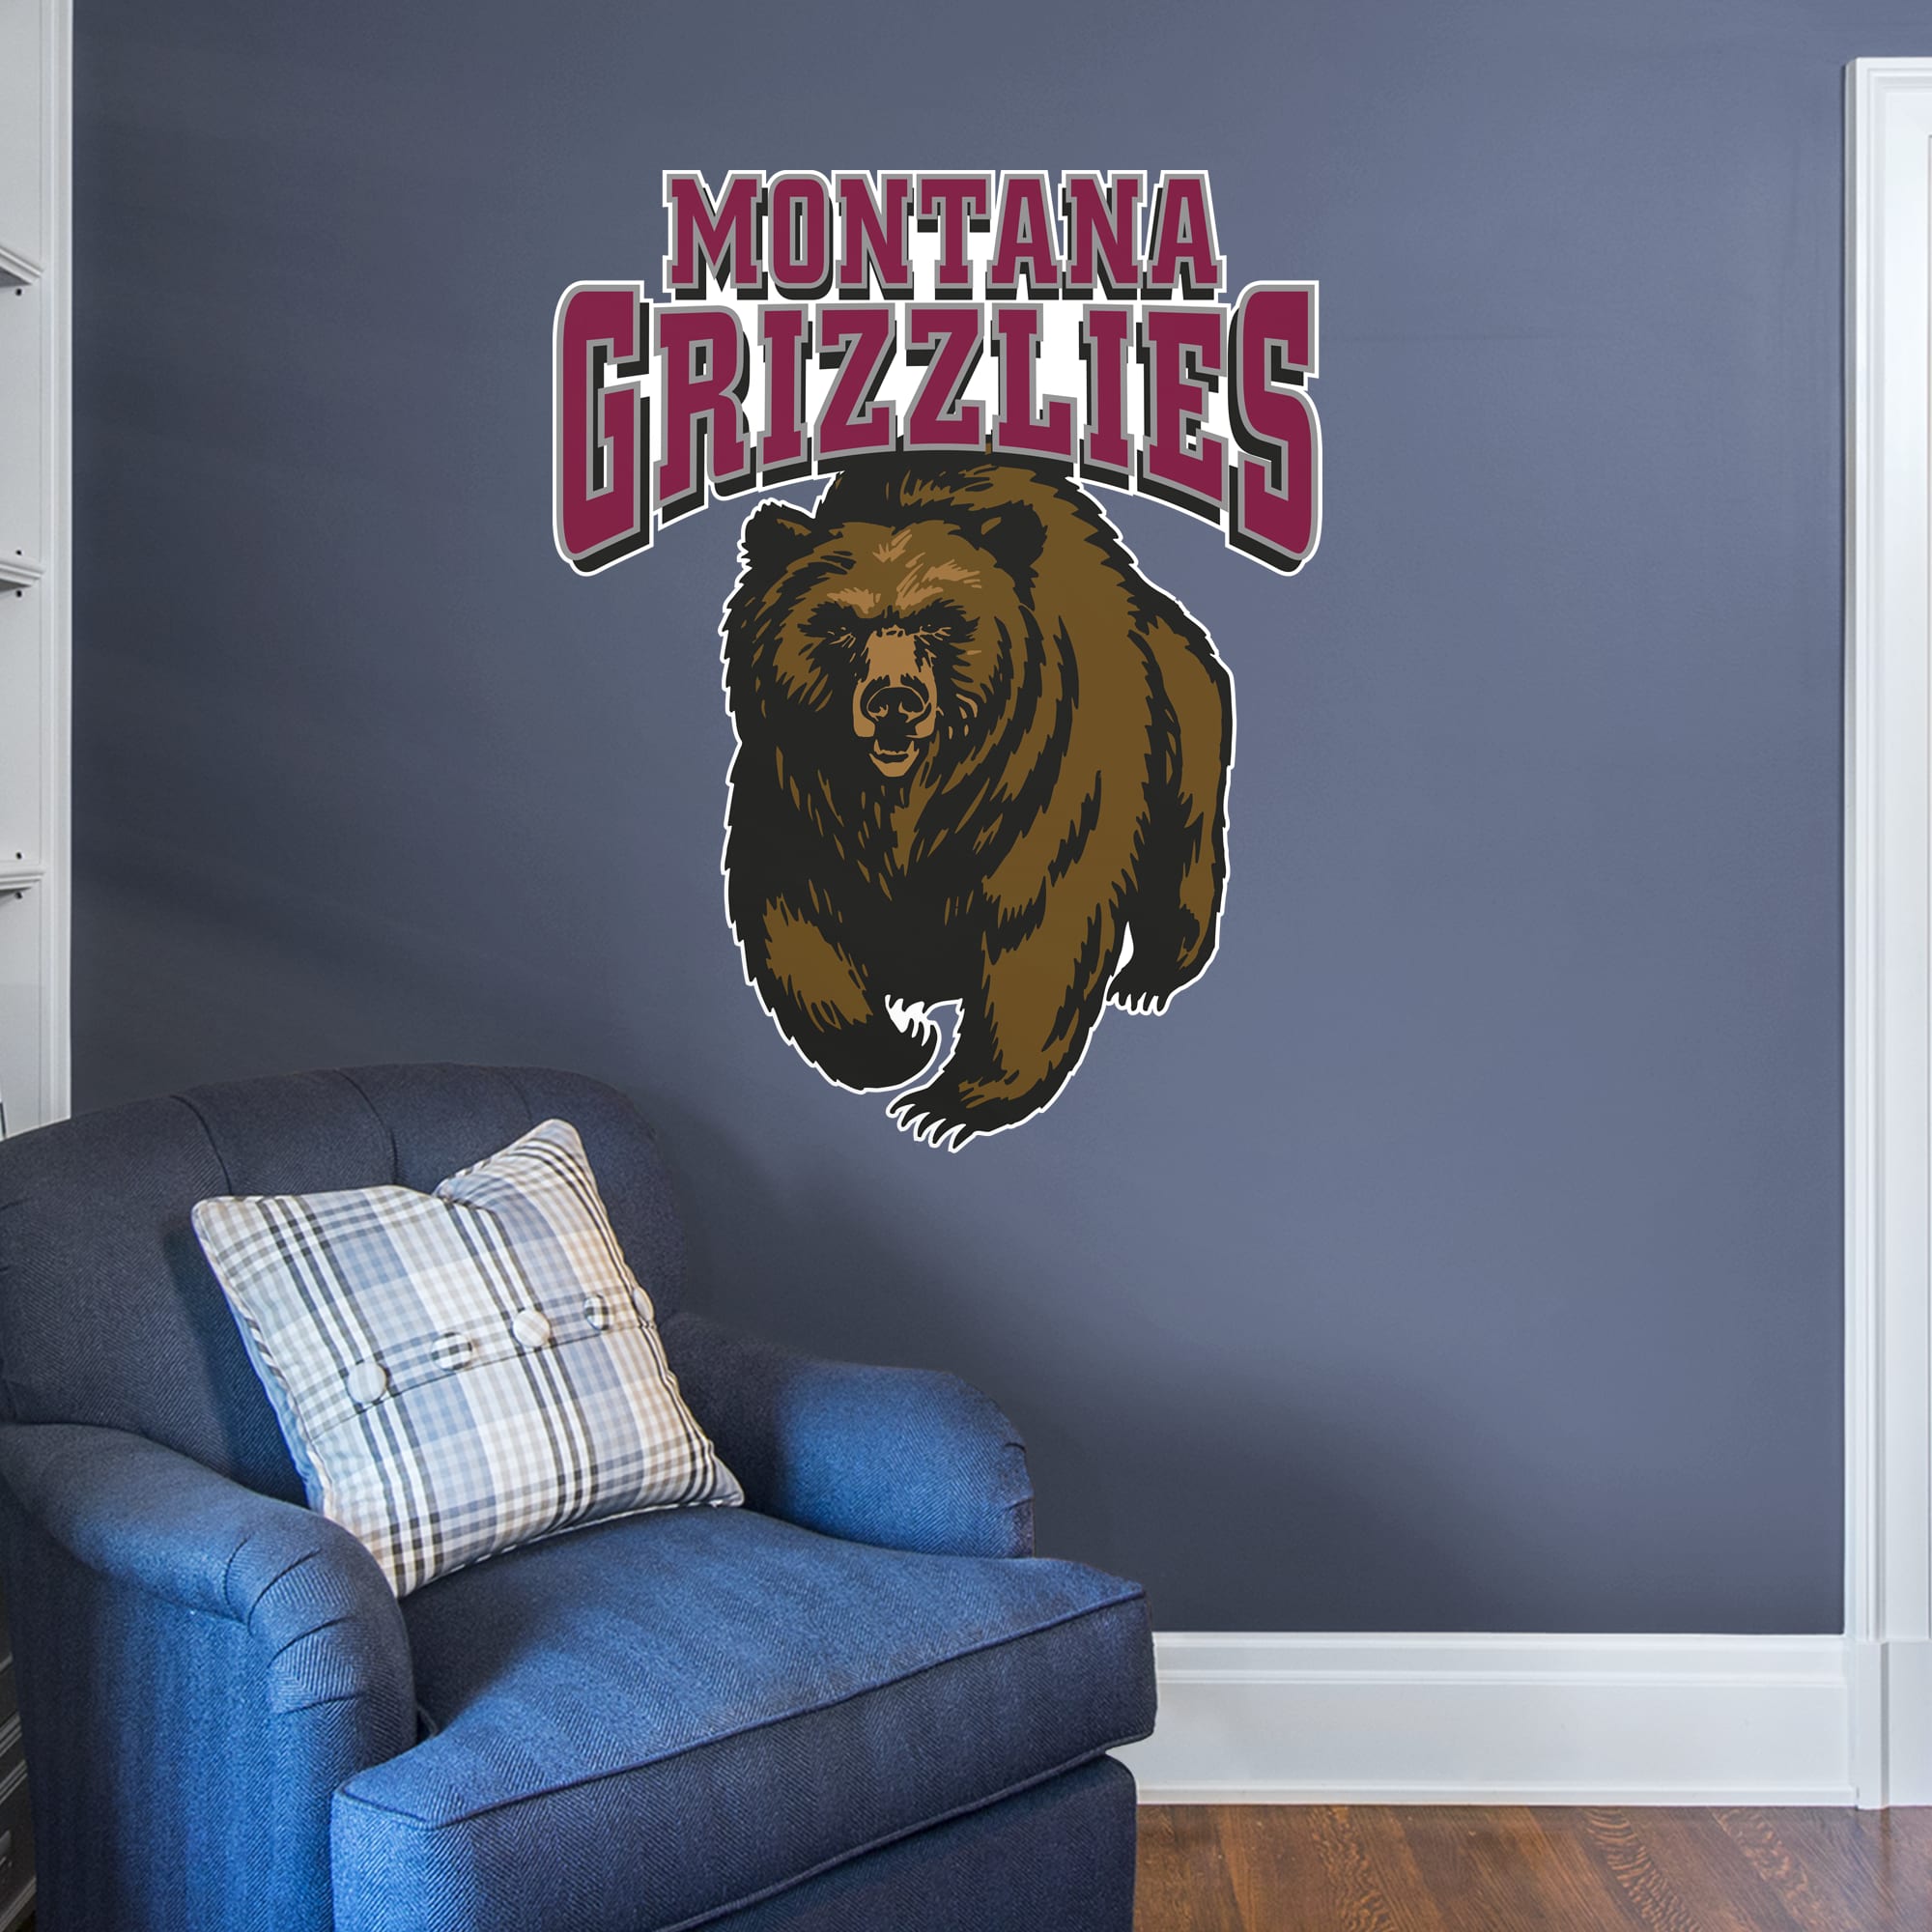 Montana Grizzlies: Logo - Officially Licensed Removable Wall Decal 38.0"W x 49.0"H by Fathead | Vinyl